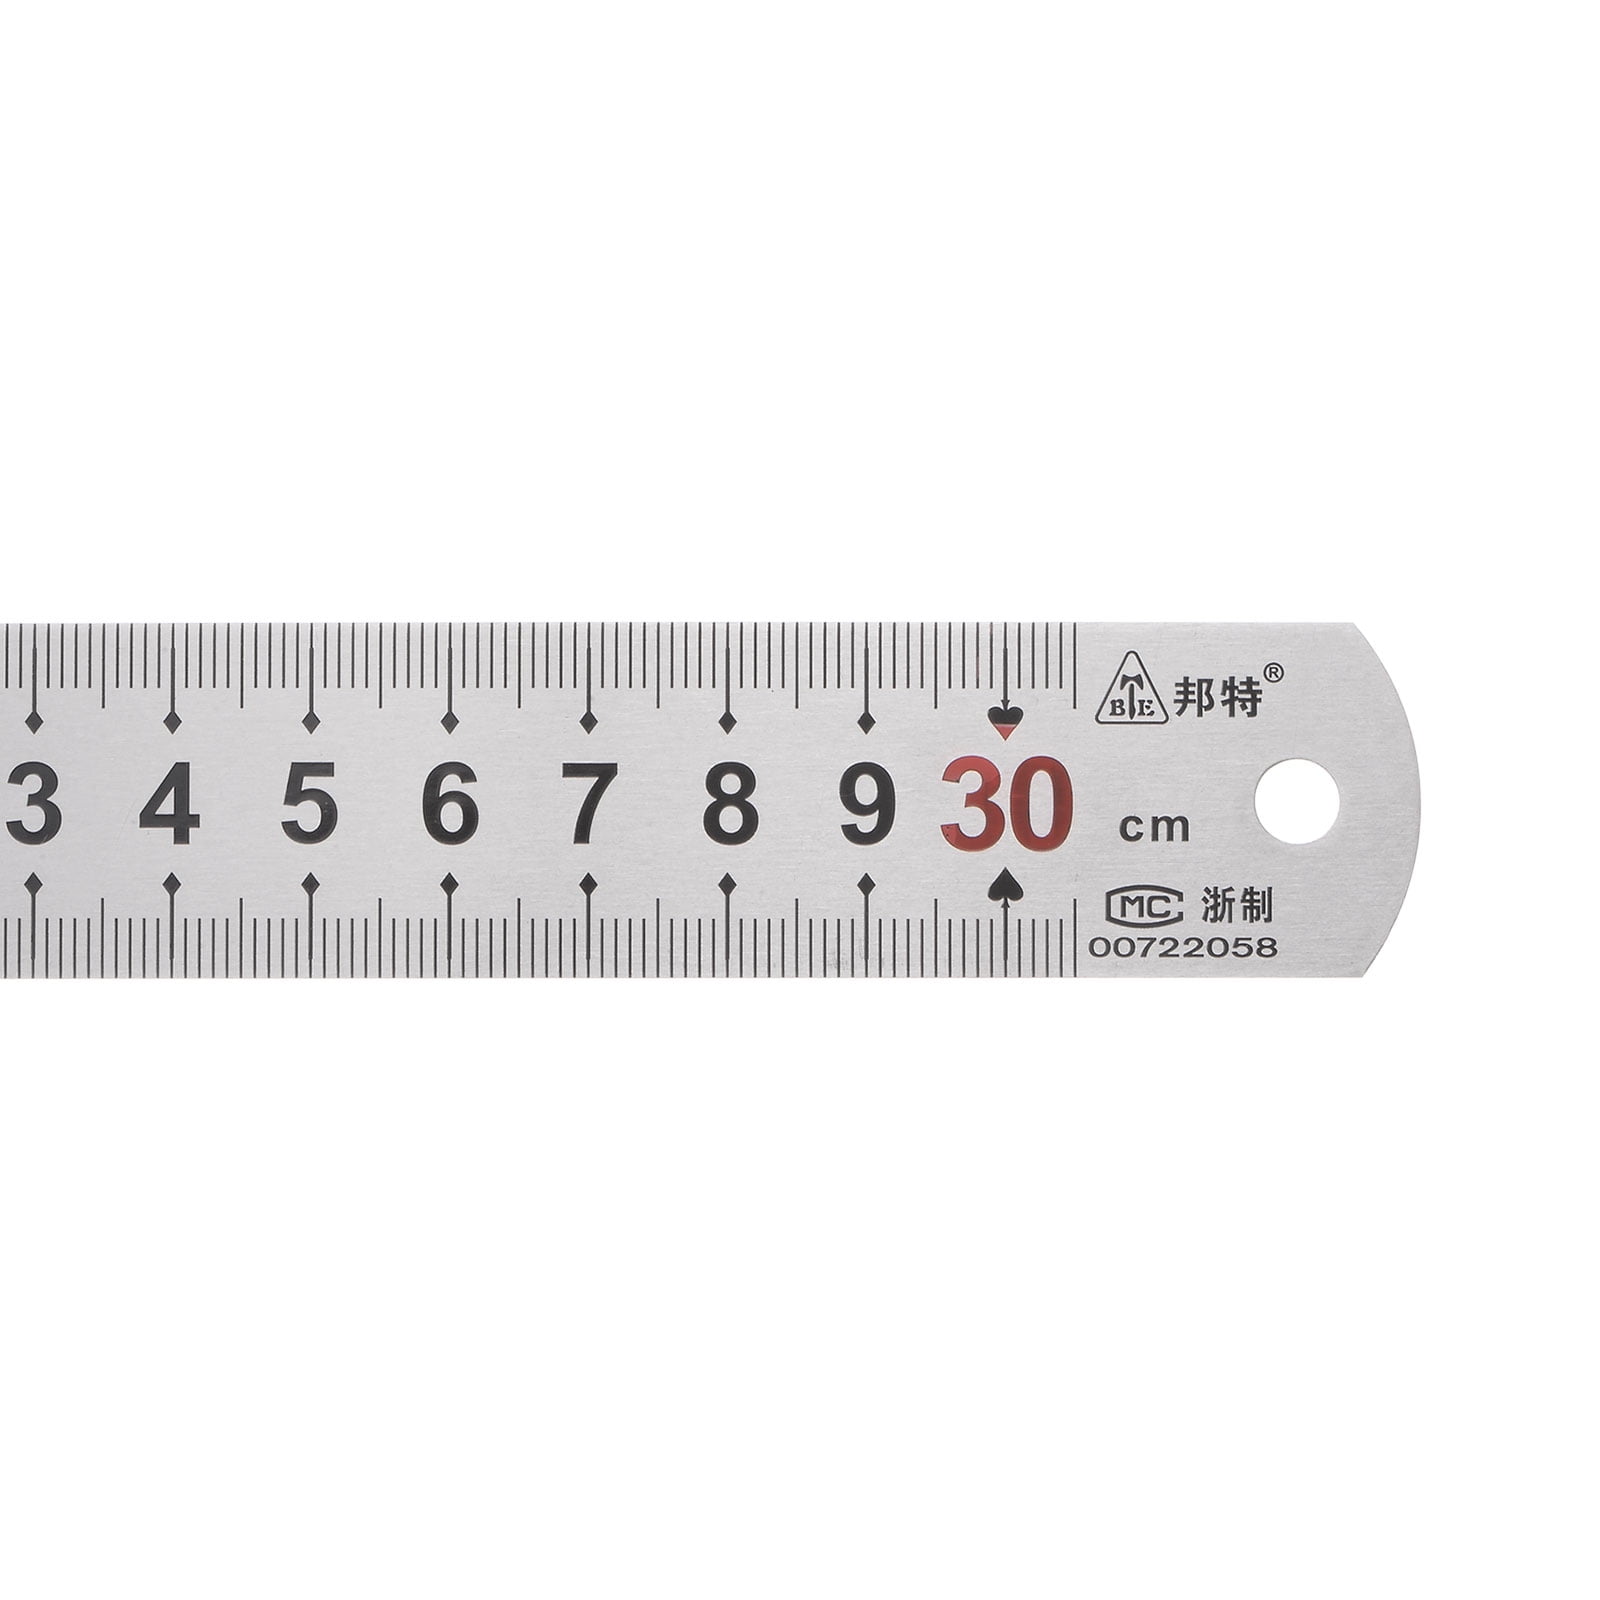 Stainless Steel Ruler 12 inch, Size: 11.2 X 1.2 X 0.1 Inches at Rs